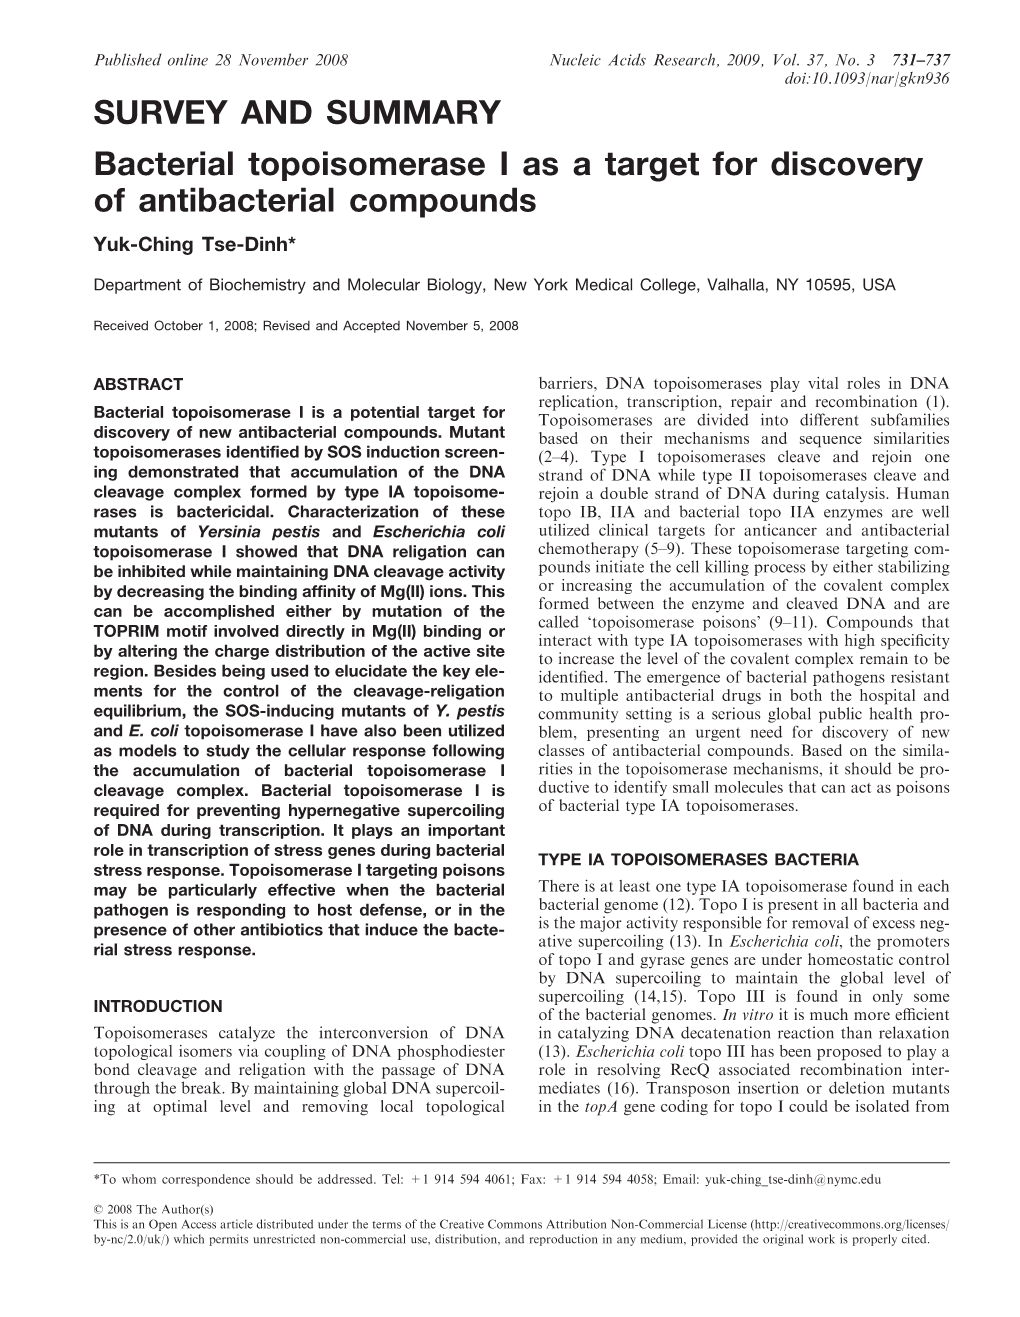 SURVEY and SUMMARY Bacterial Topoisomerase I As a Target for Discovery of Antibacterial Compounds Yuk-Ching Tse-Dinh*